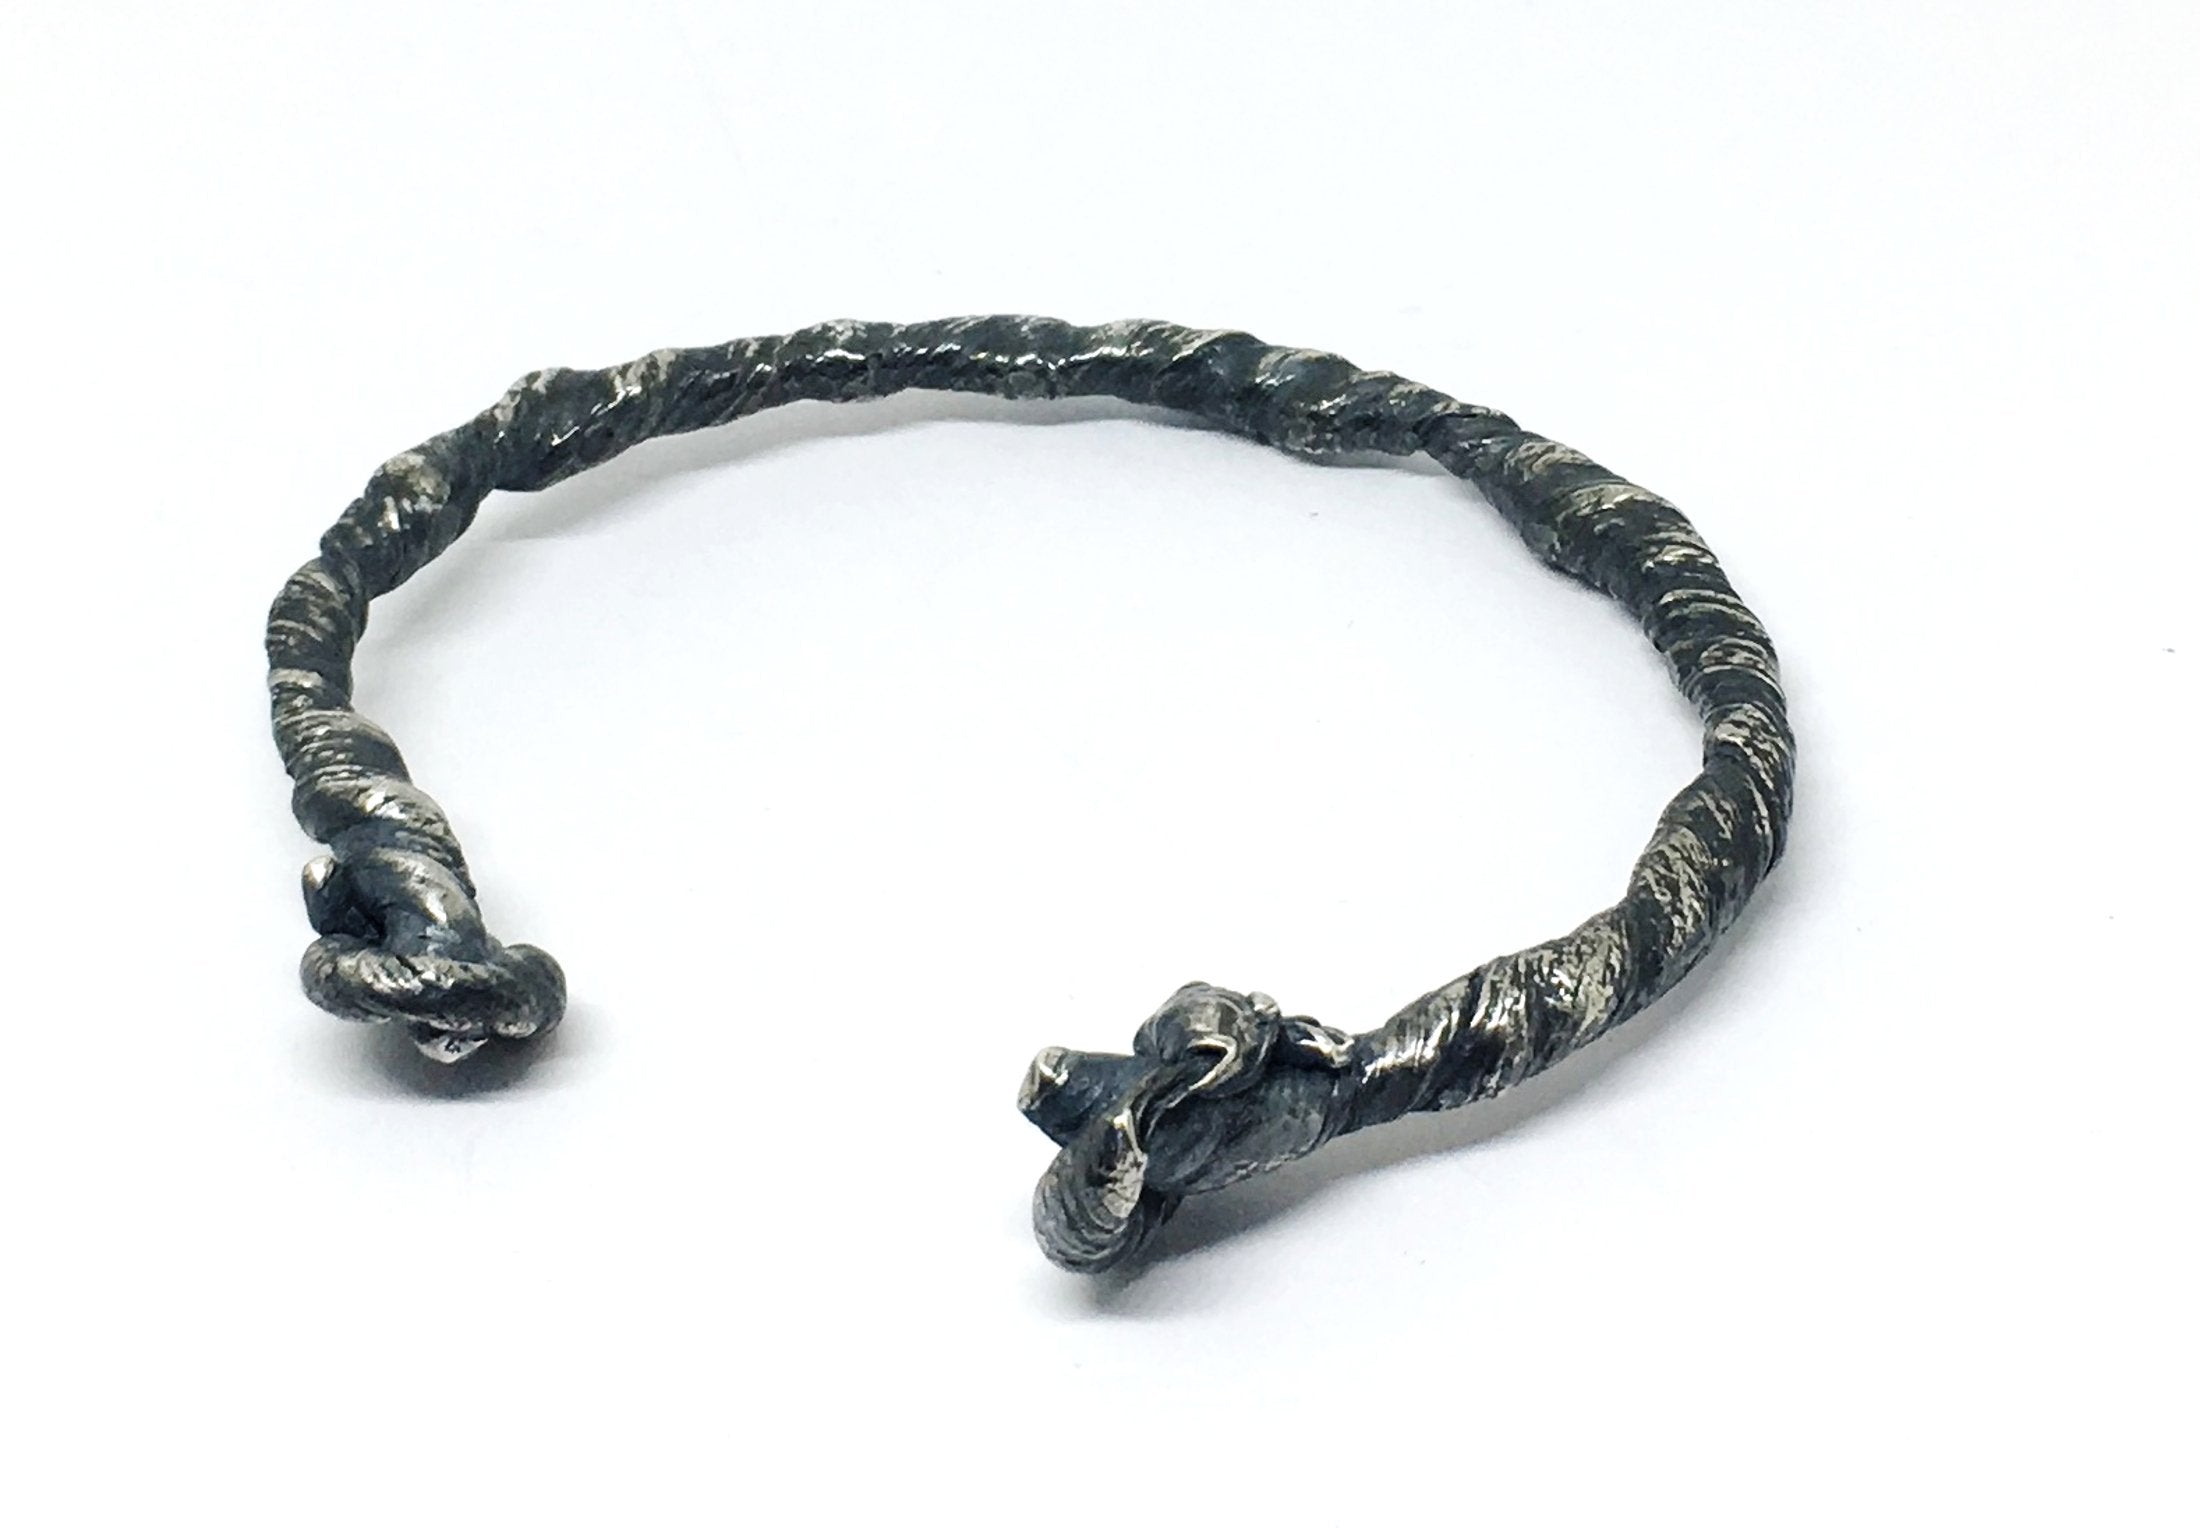 Oxidized sterling silver knotted rope cuff bracelet